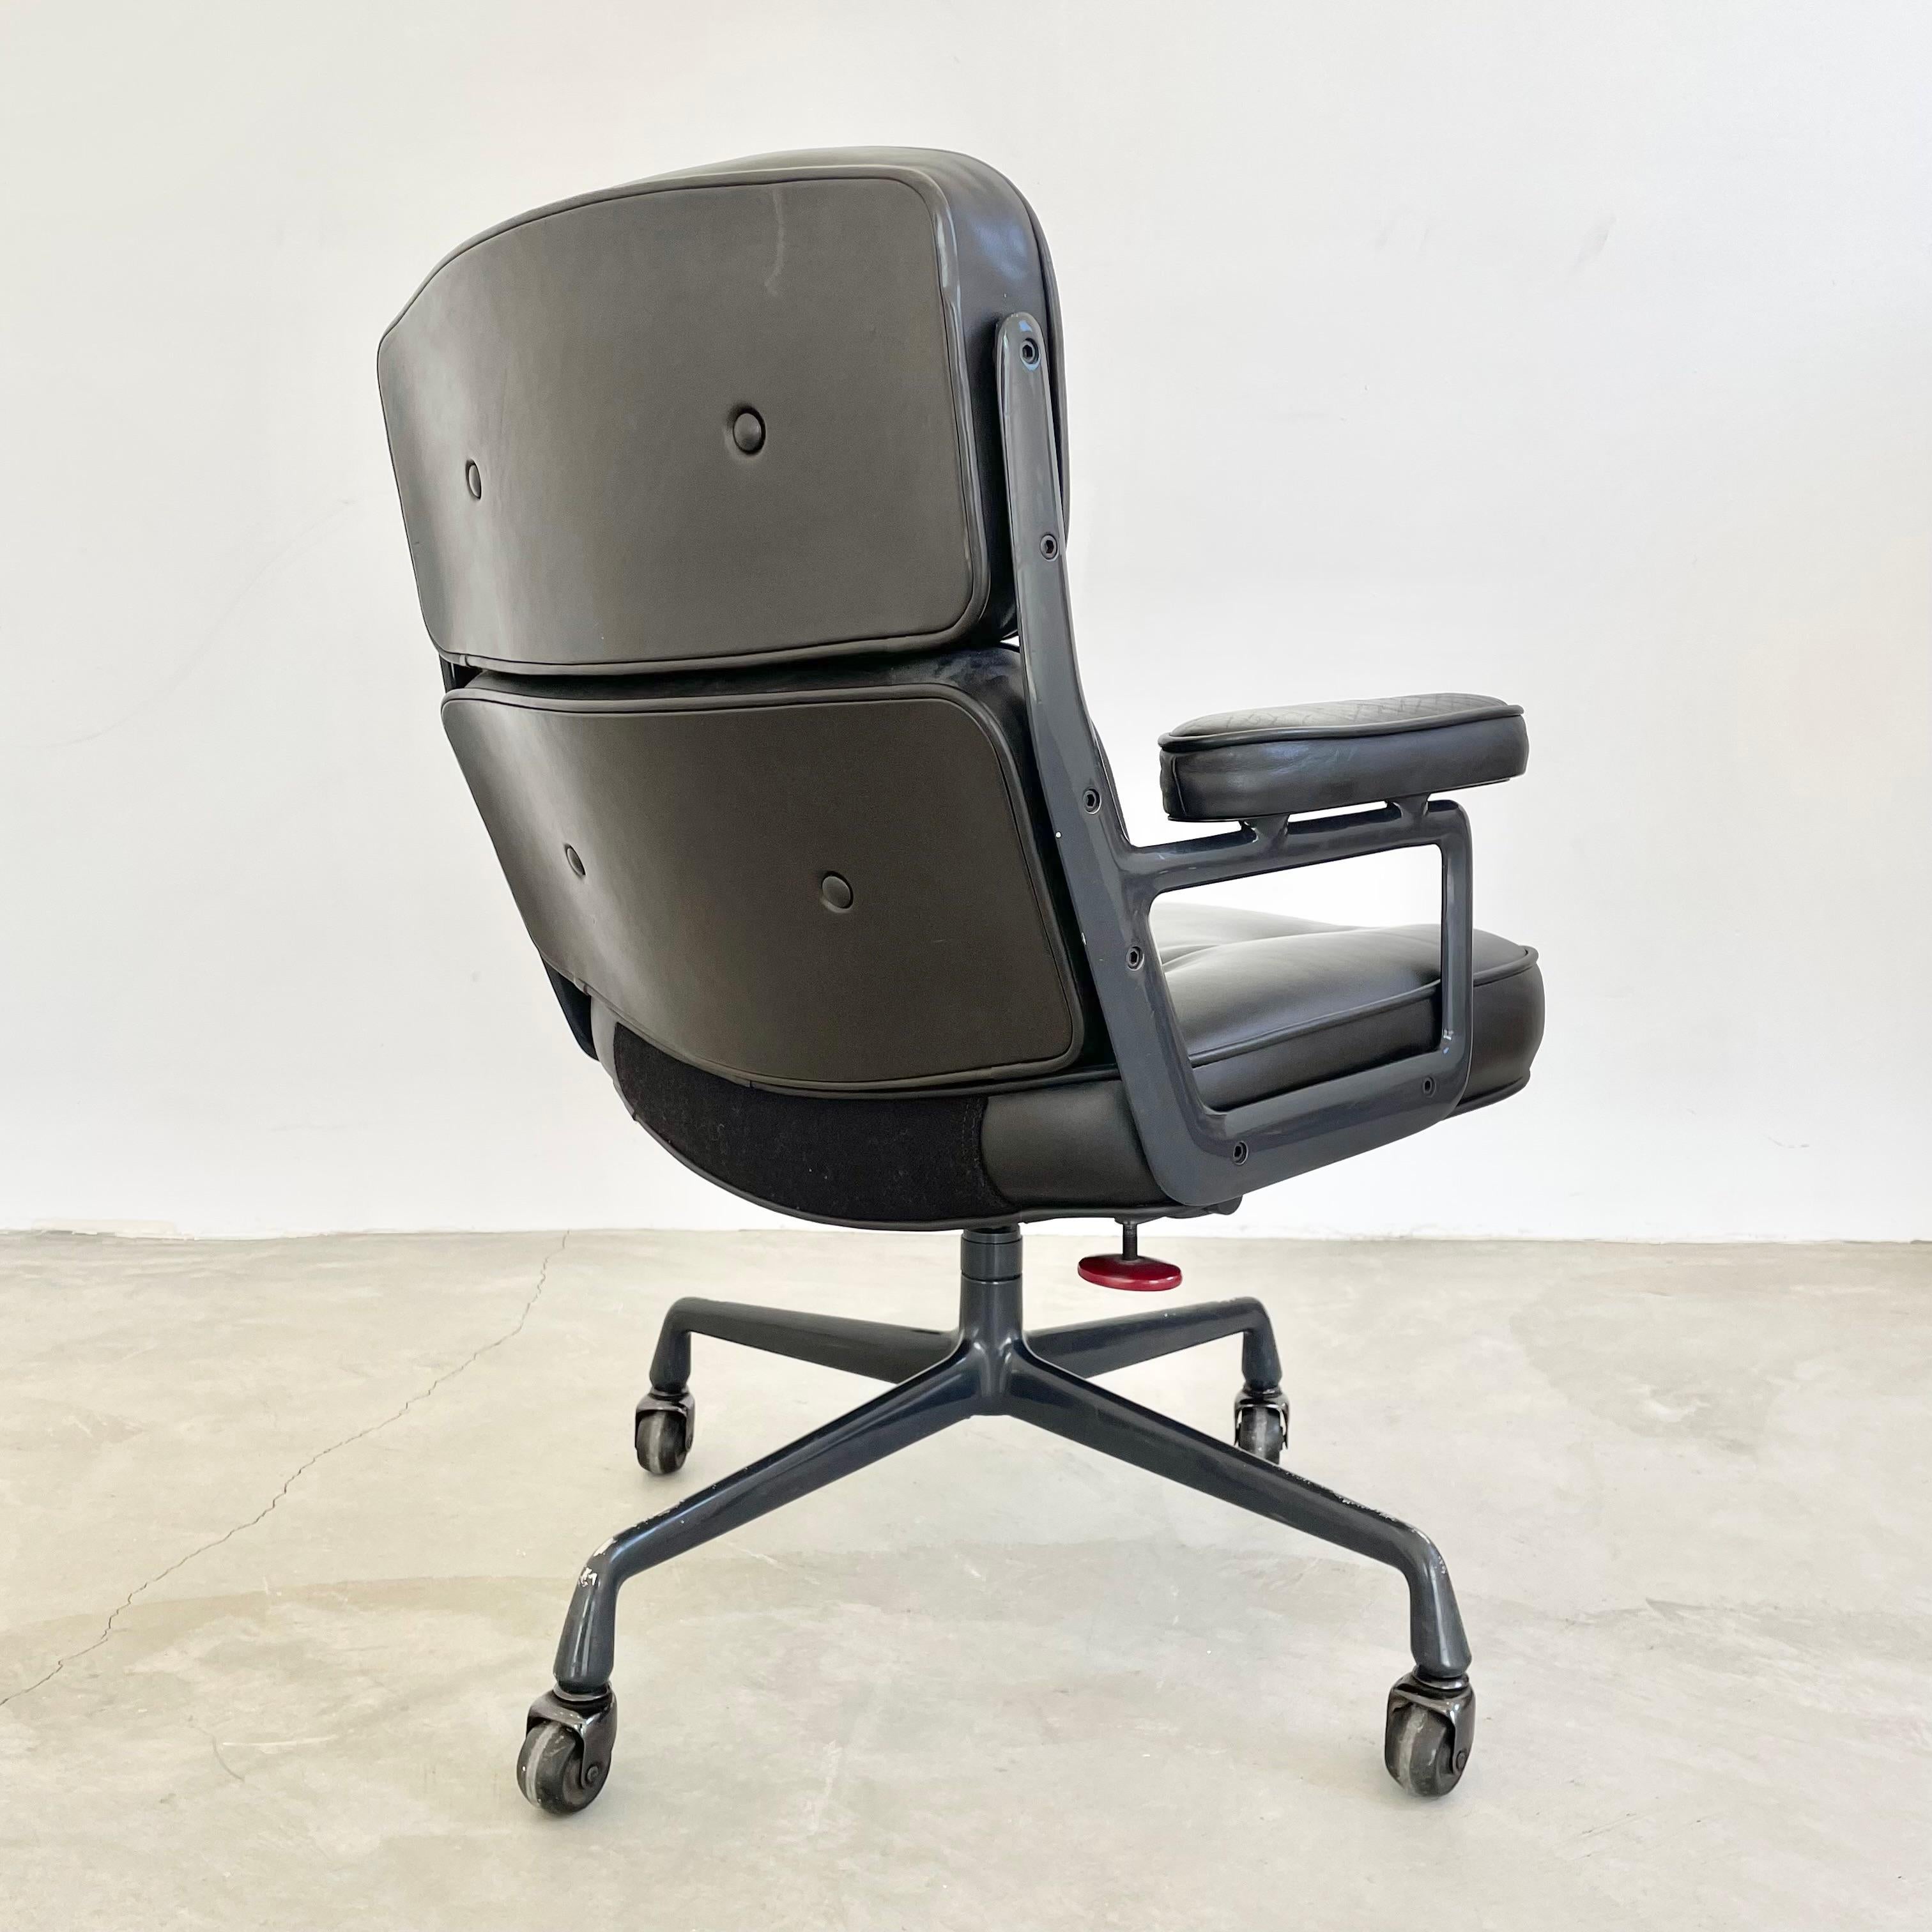 North American Eames Time Life Chair in Black Leather for Herman Miller, 1984 USA